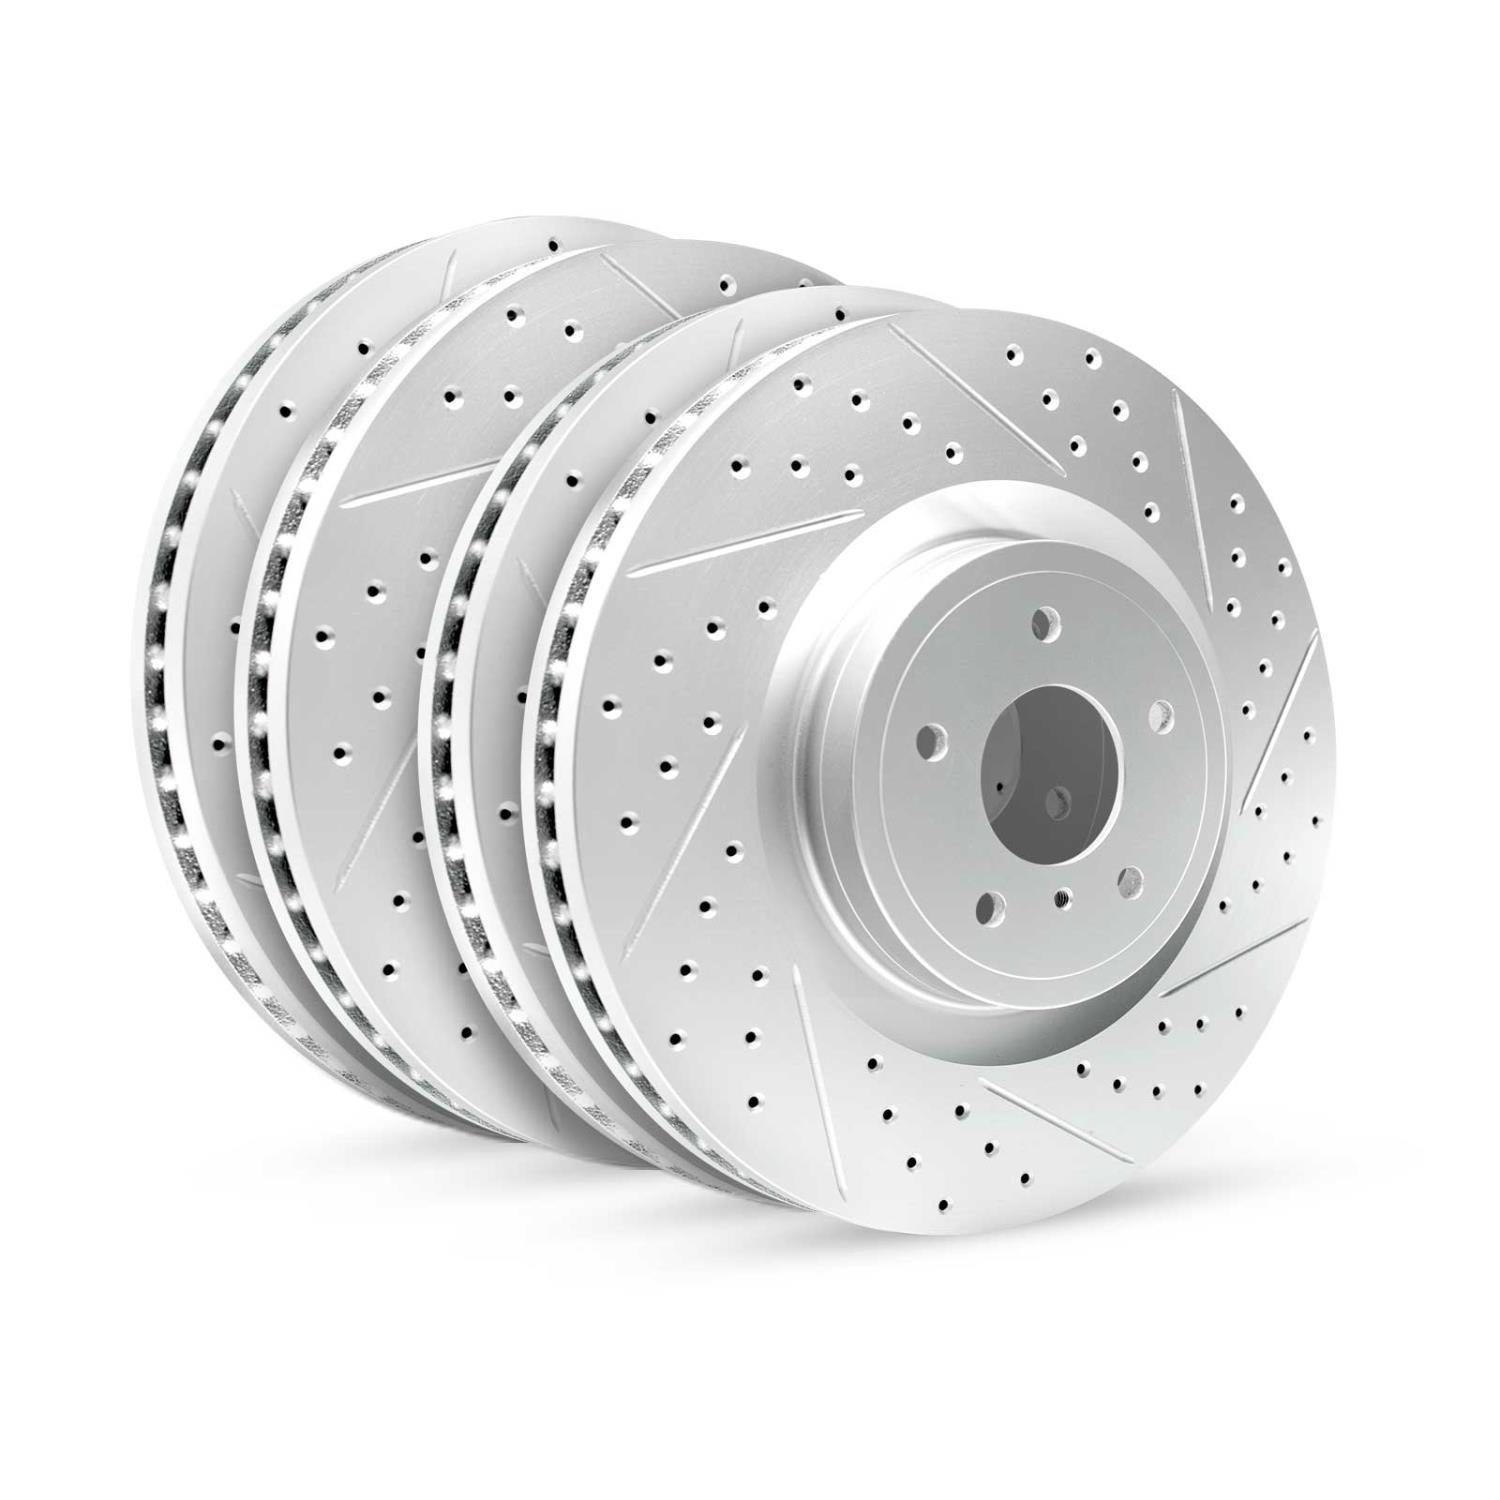 GEO-Carbon Drilled/Slotted Rotors, 2018-2019 Land Rover,